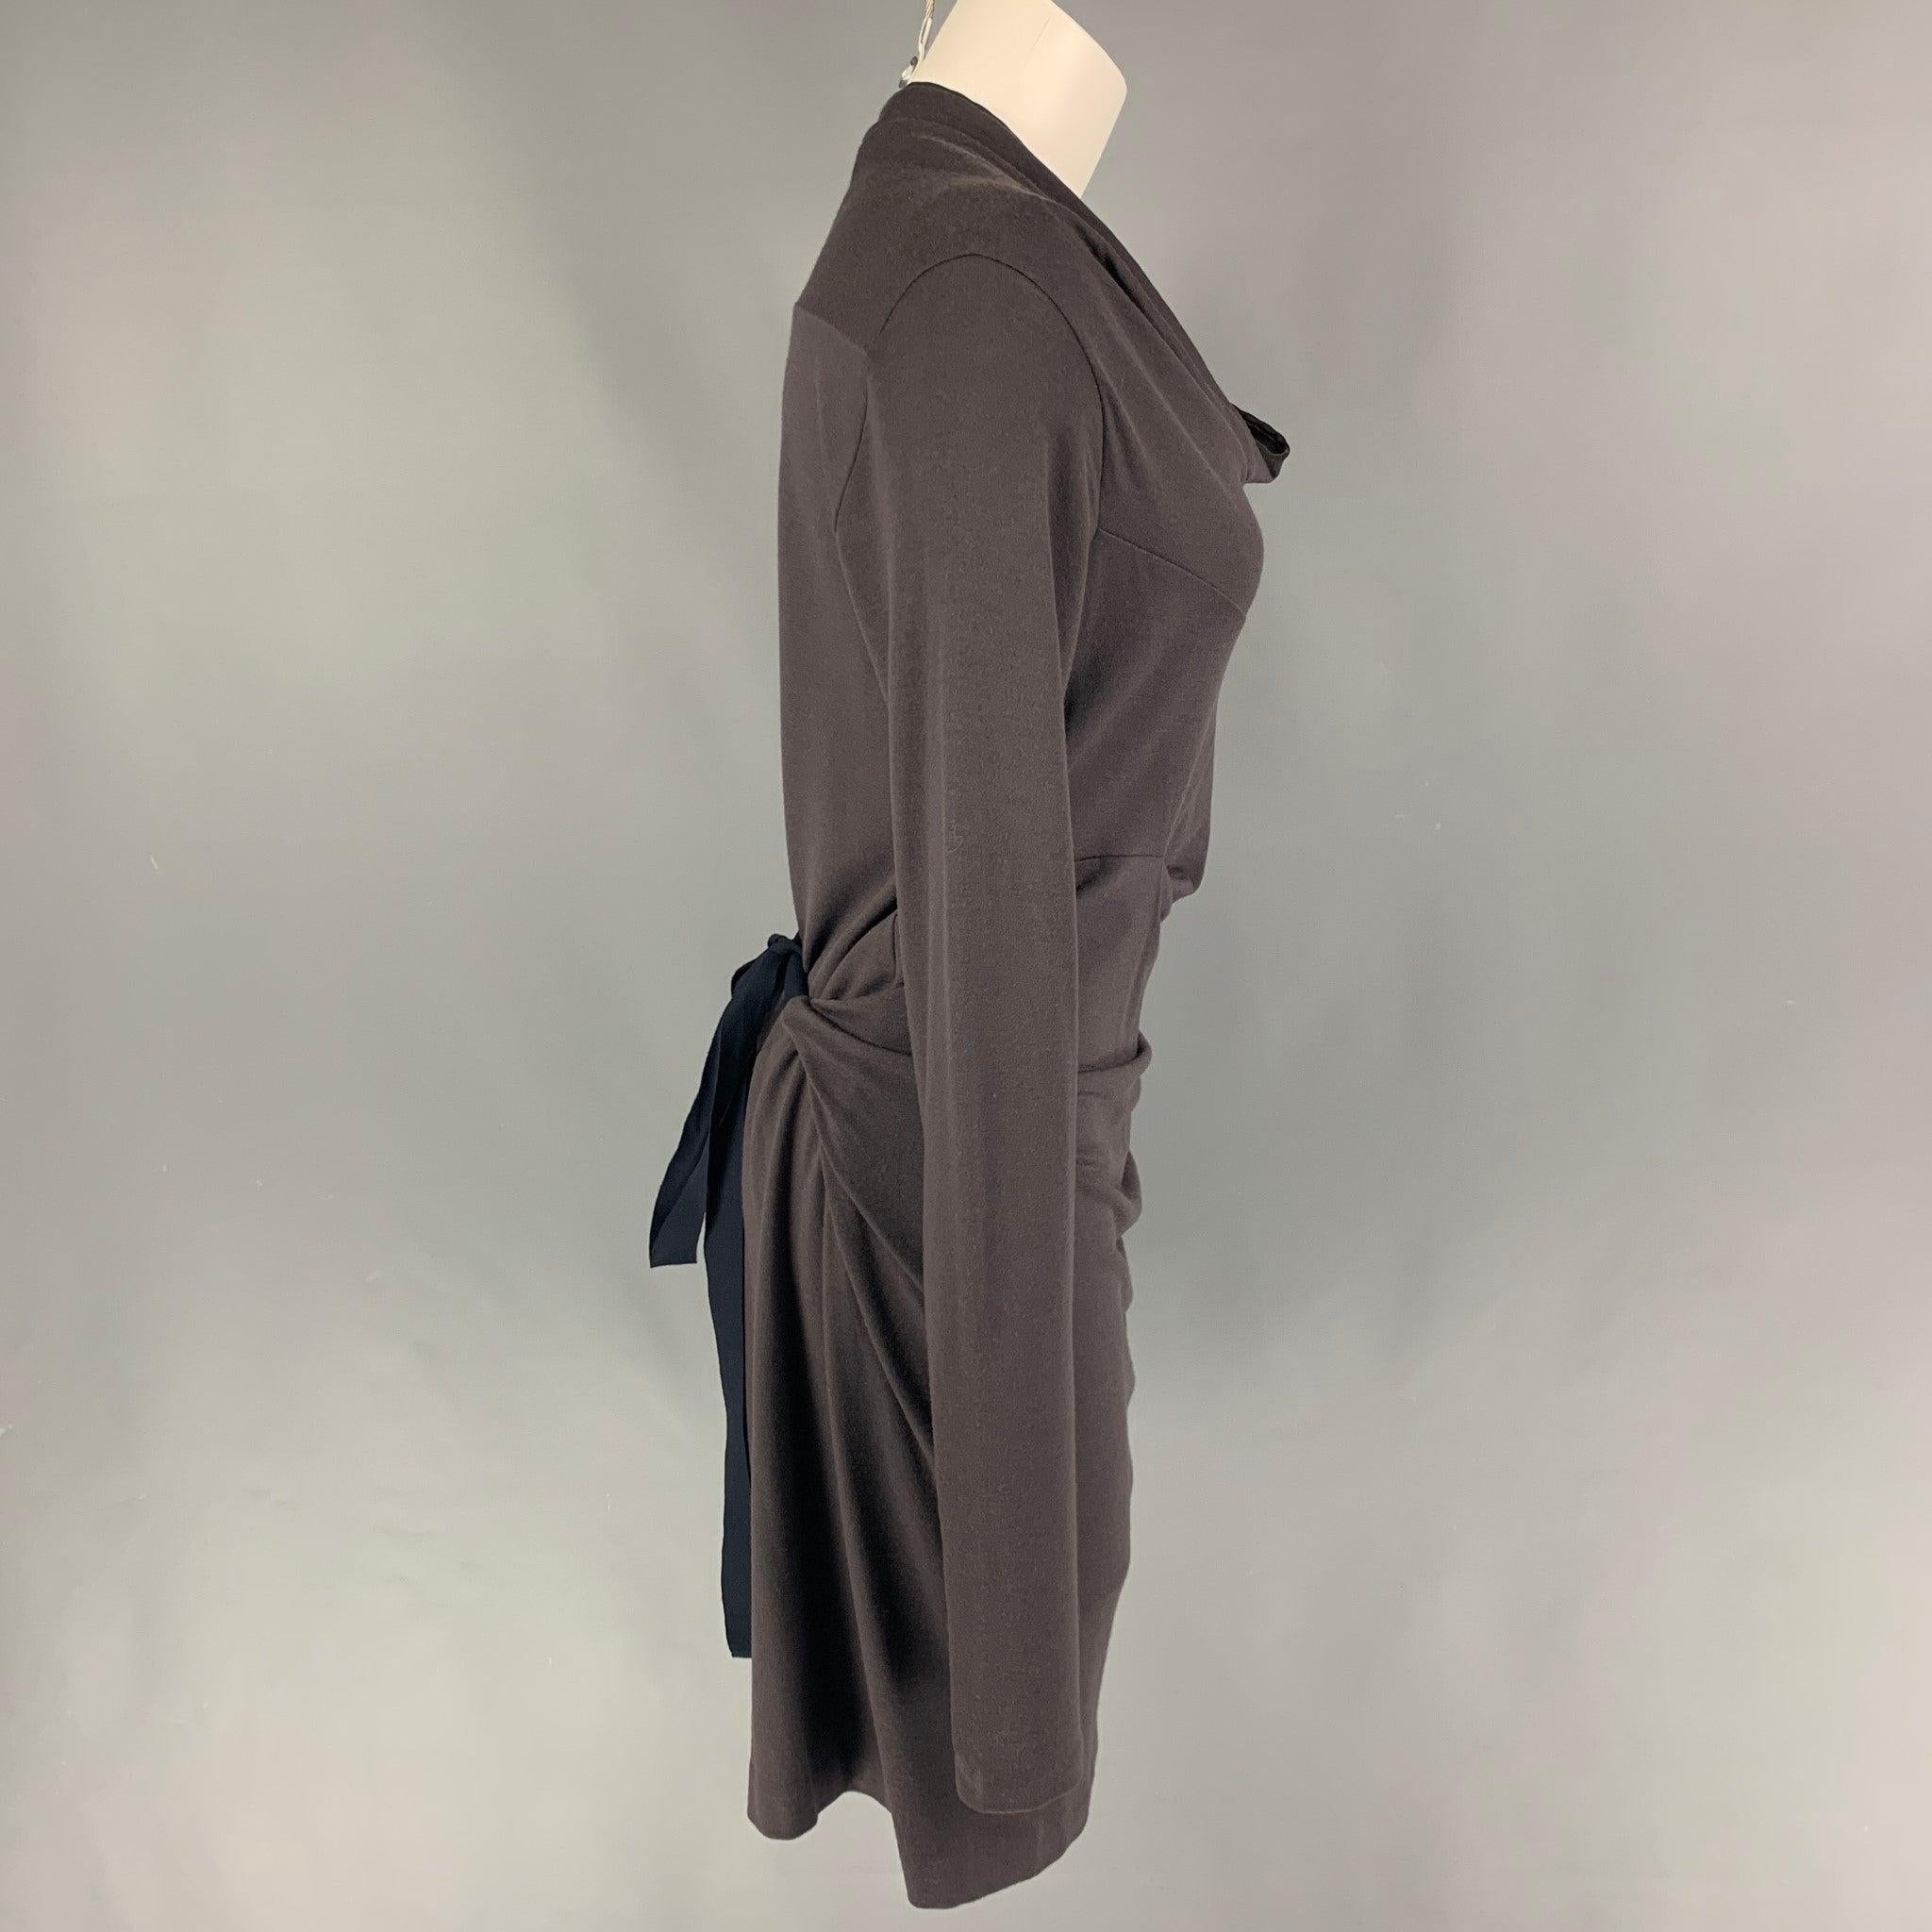 BRUNELLO CUCINELLI dress comes in a taupe jersey material featuring long sleeves, draped neckline, and a belted detail.
Very Good
Pre-Owned Condition. 

Marked:   42 

Measurements: 
 
Shoulder: 15 inches  Bust: 36 in Waist: 36 inches  Sleeve: 31.5